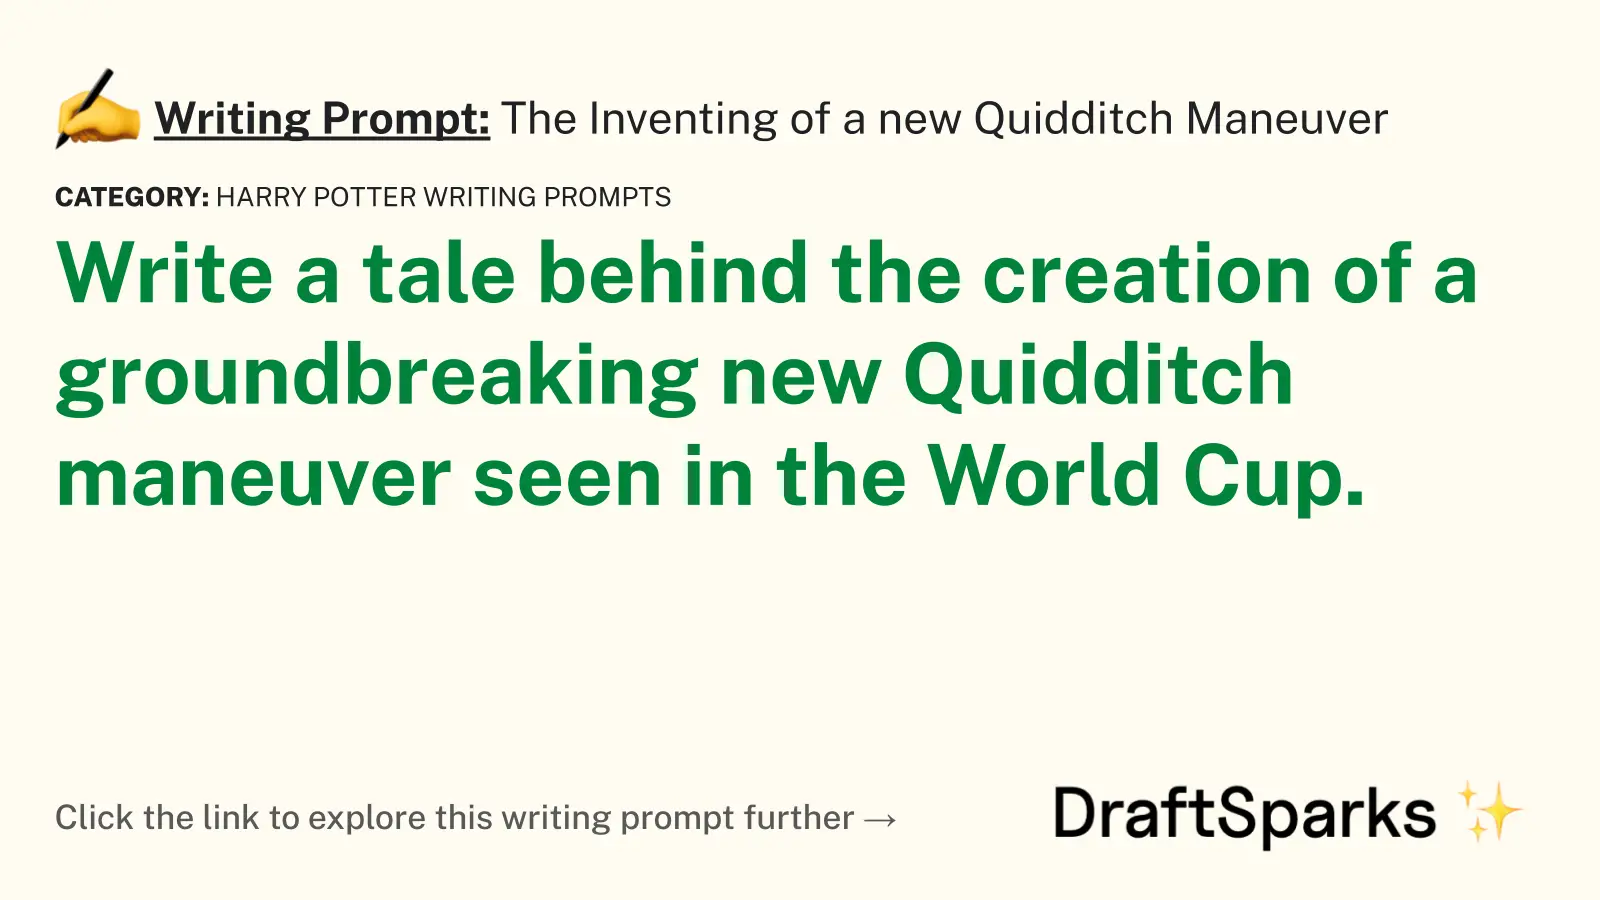 The Inventing of a new Quidditch Maneuver